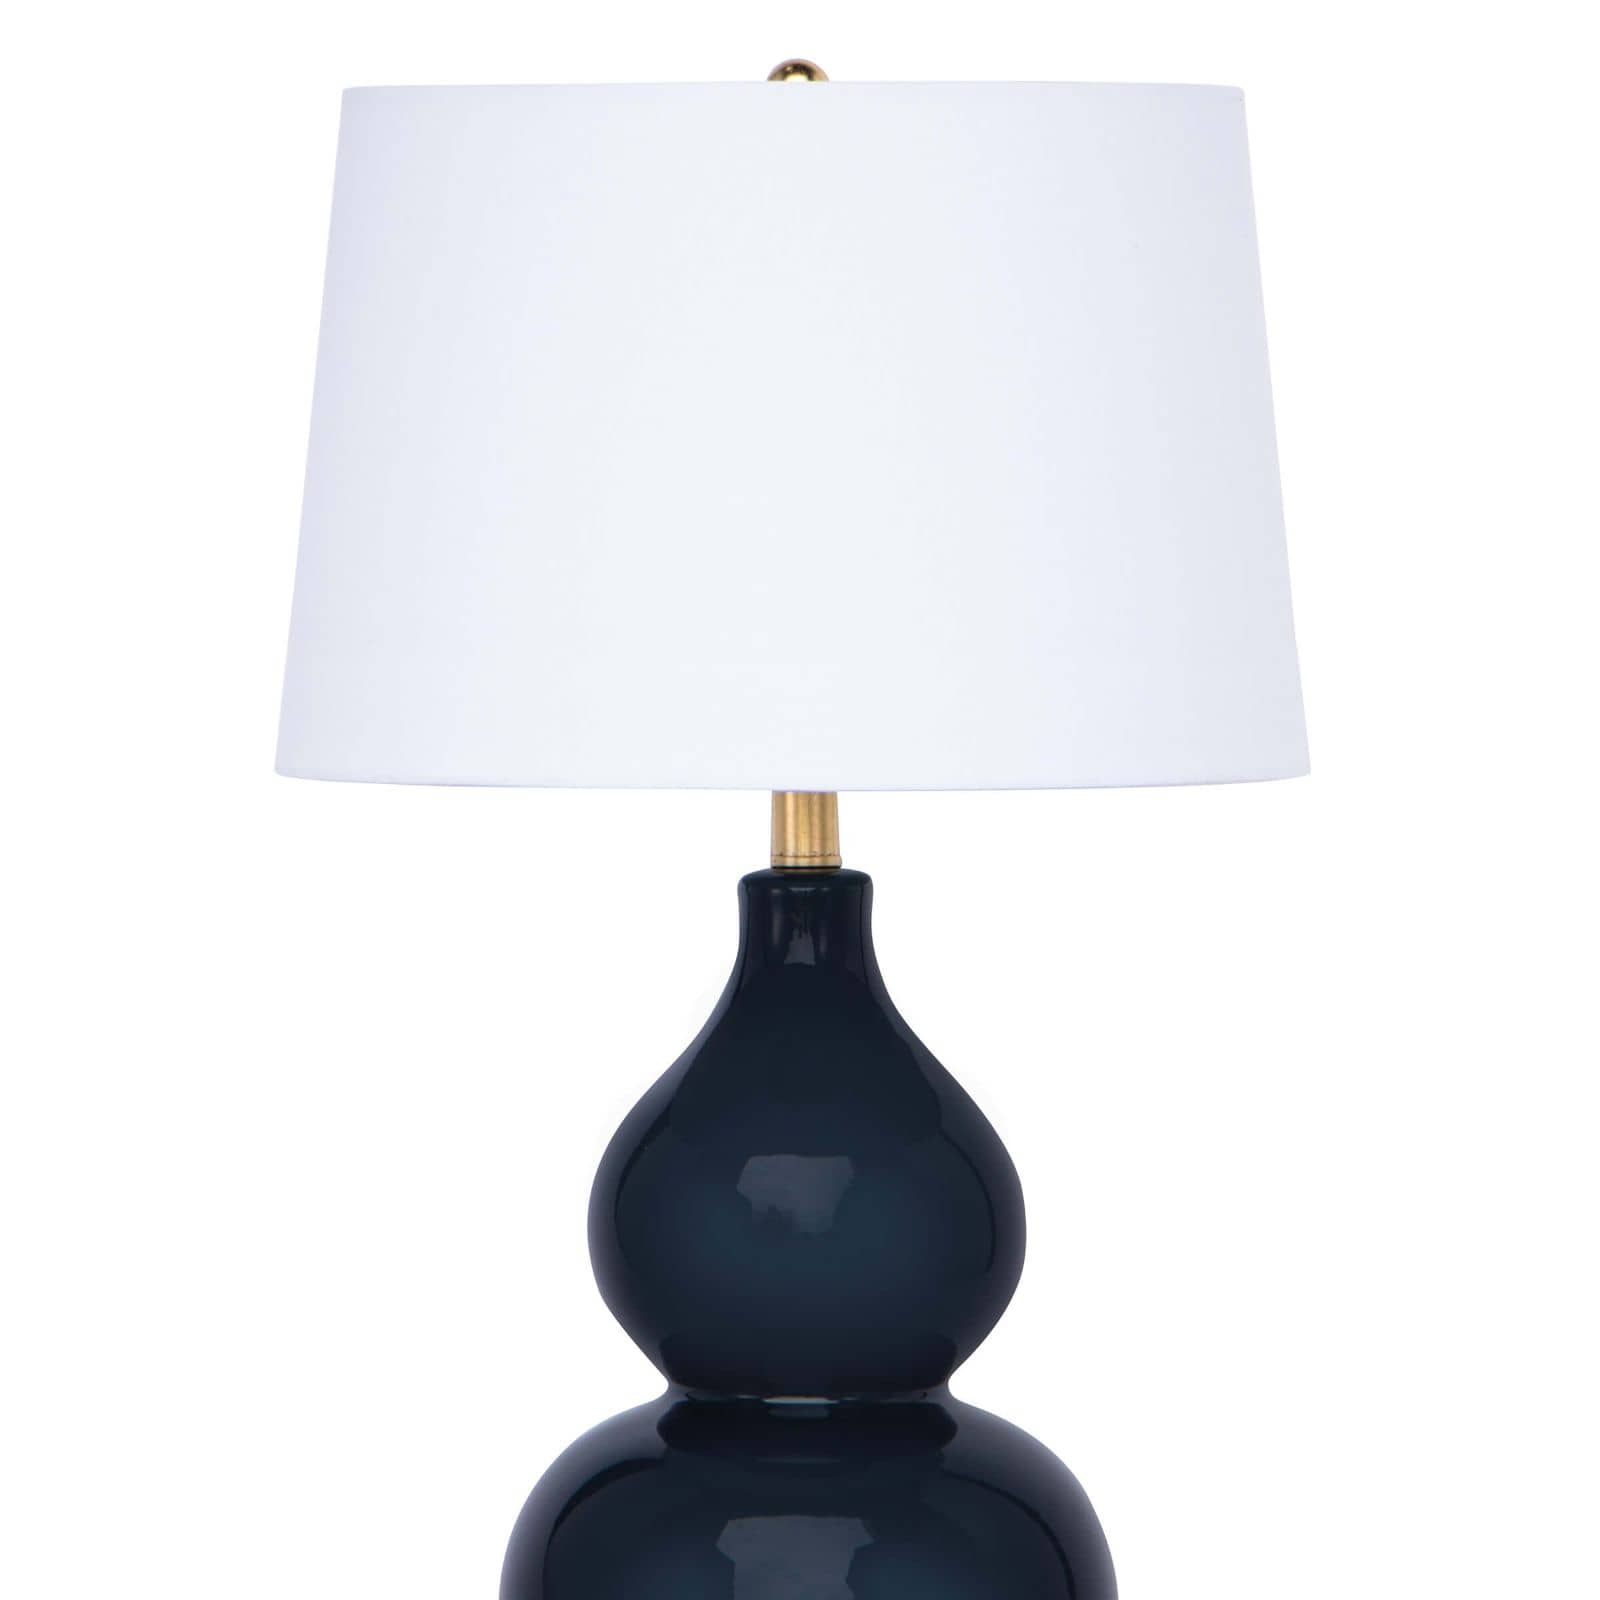 Madison Ceramic Table Lamp in Navy by Coastal Living